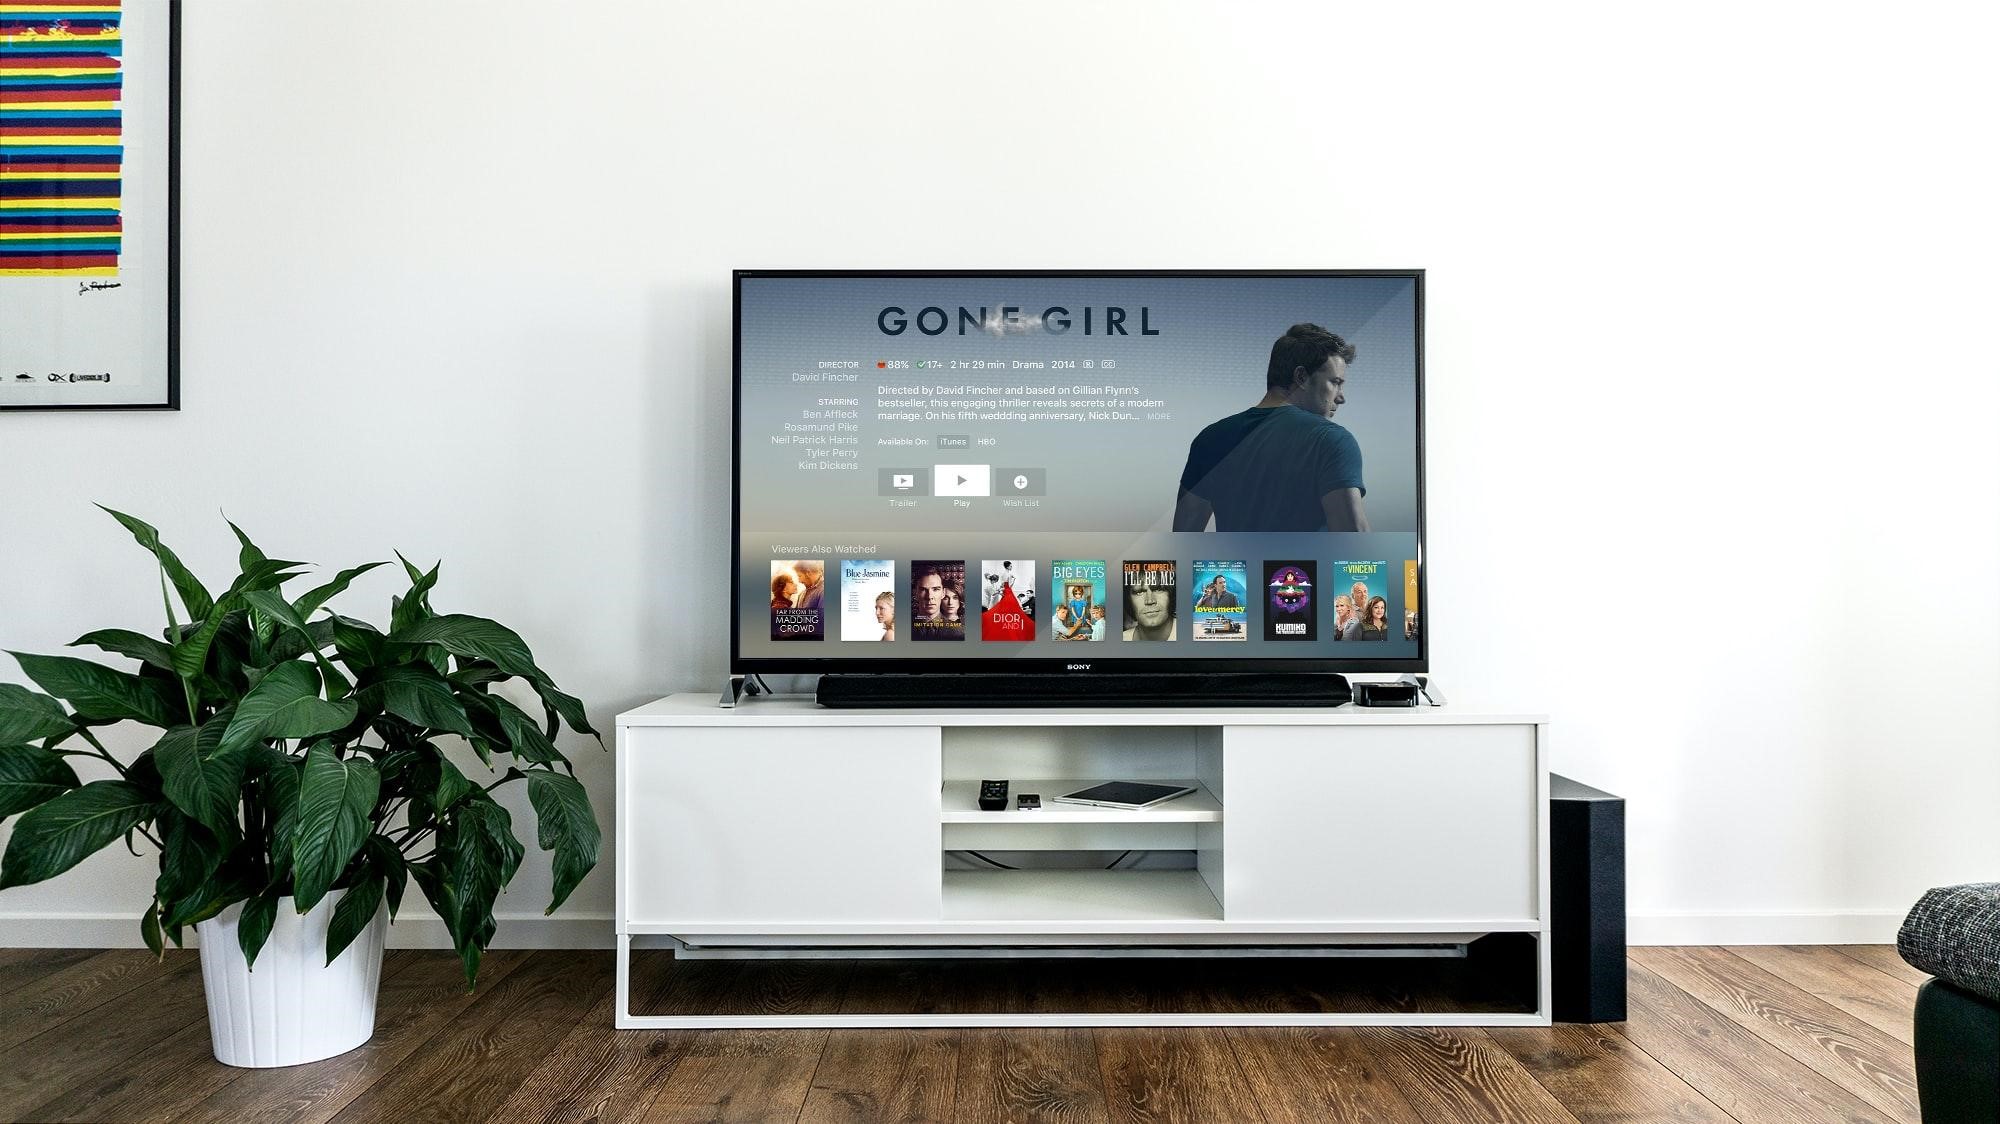 4 Alternatives to Media Center Arrangements To Mounting Your TV